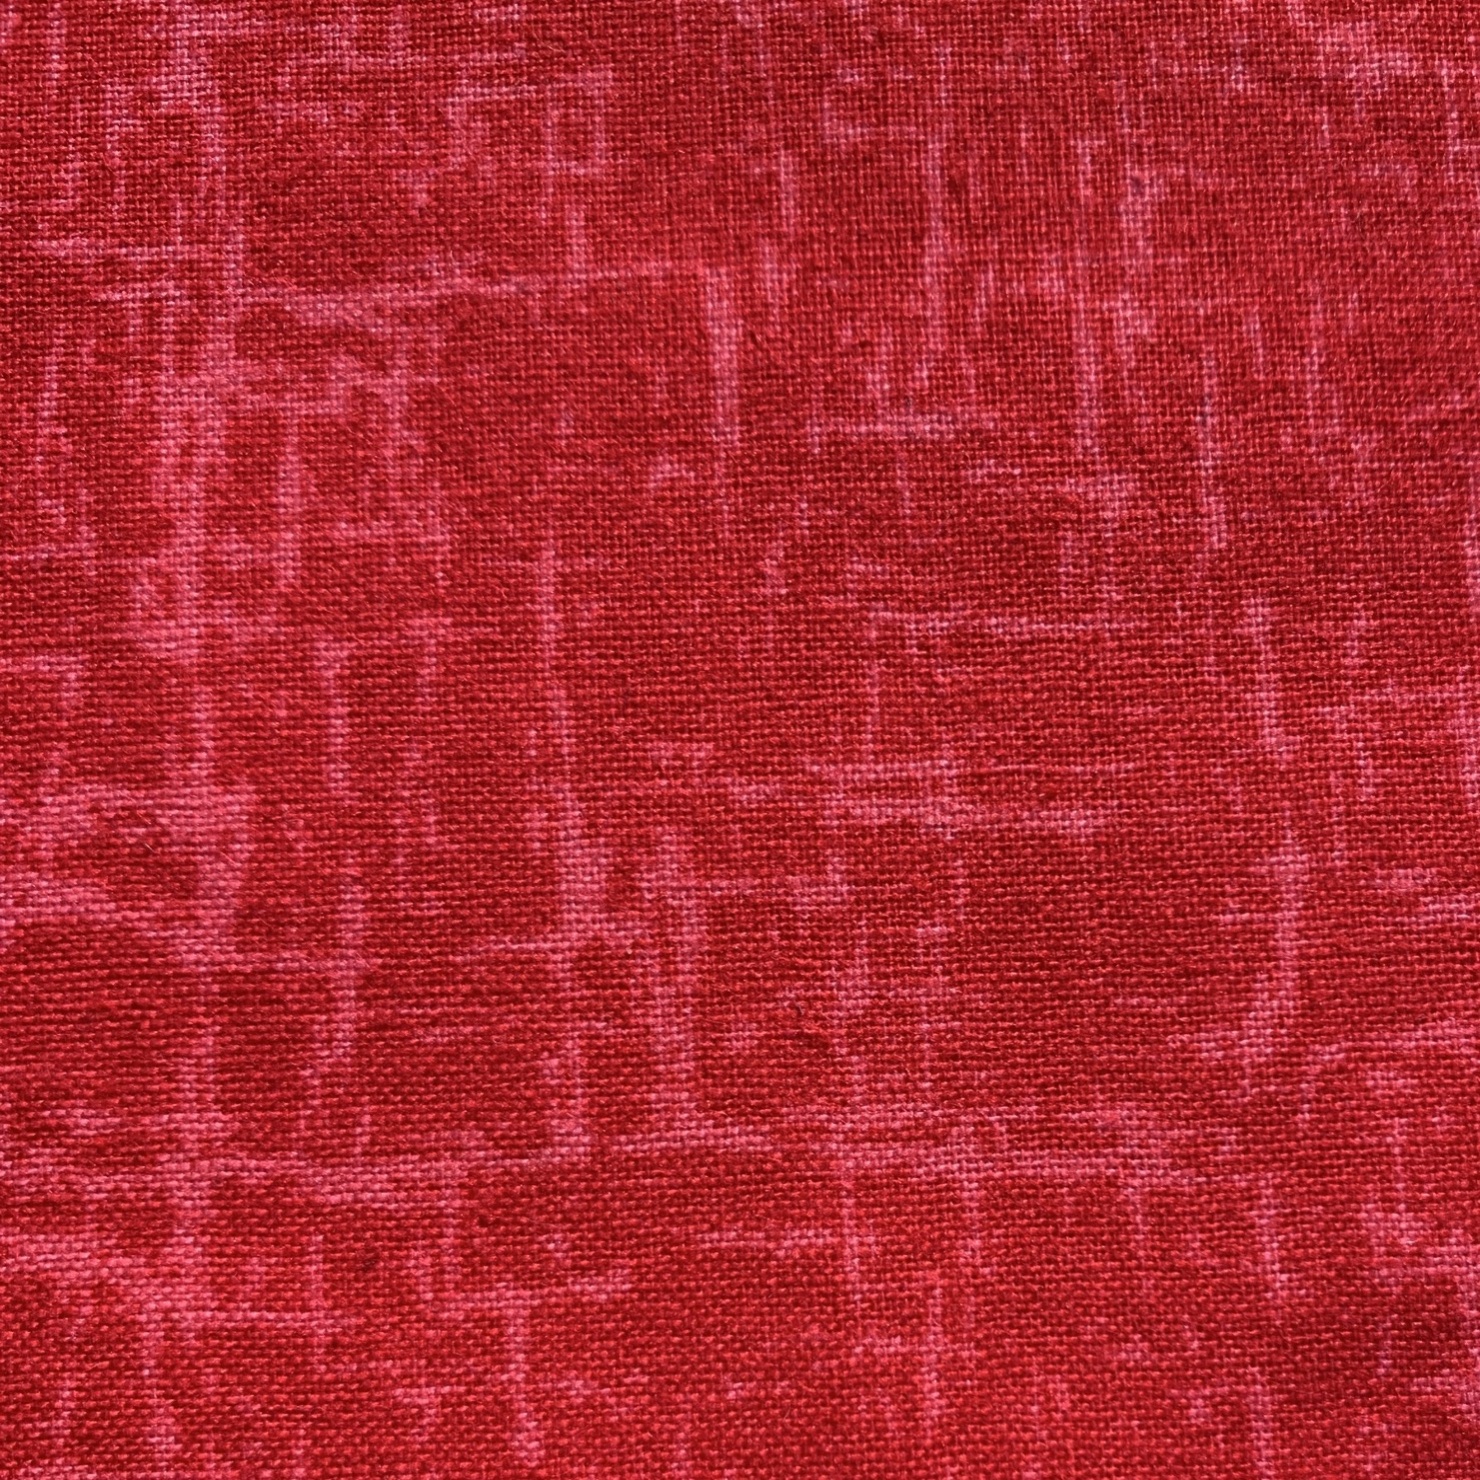 Textured Blenders Red Fabric